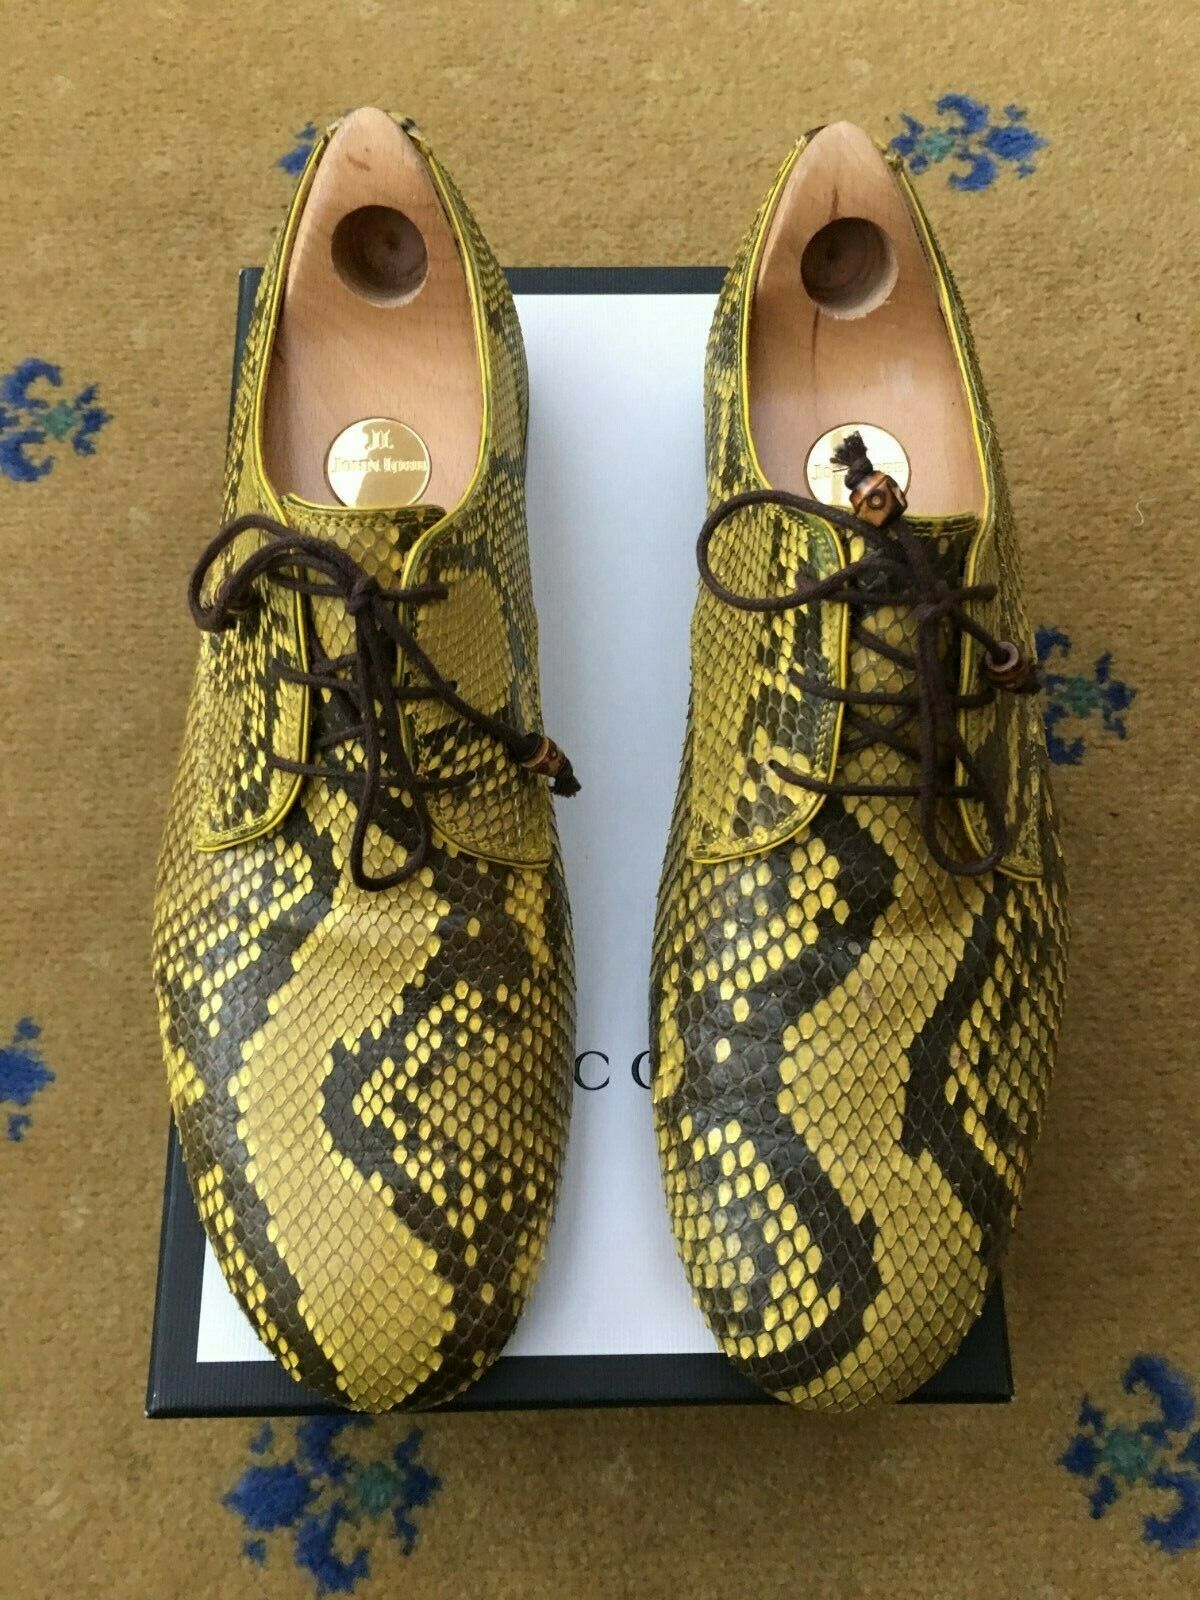 Gucci Mens Shoes Yellow Leather Snakeskin UK 9 US 10 EU 43 Bamboo Detail